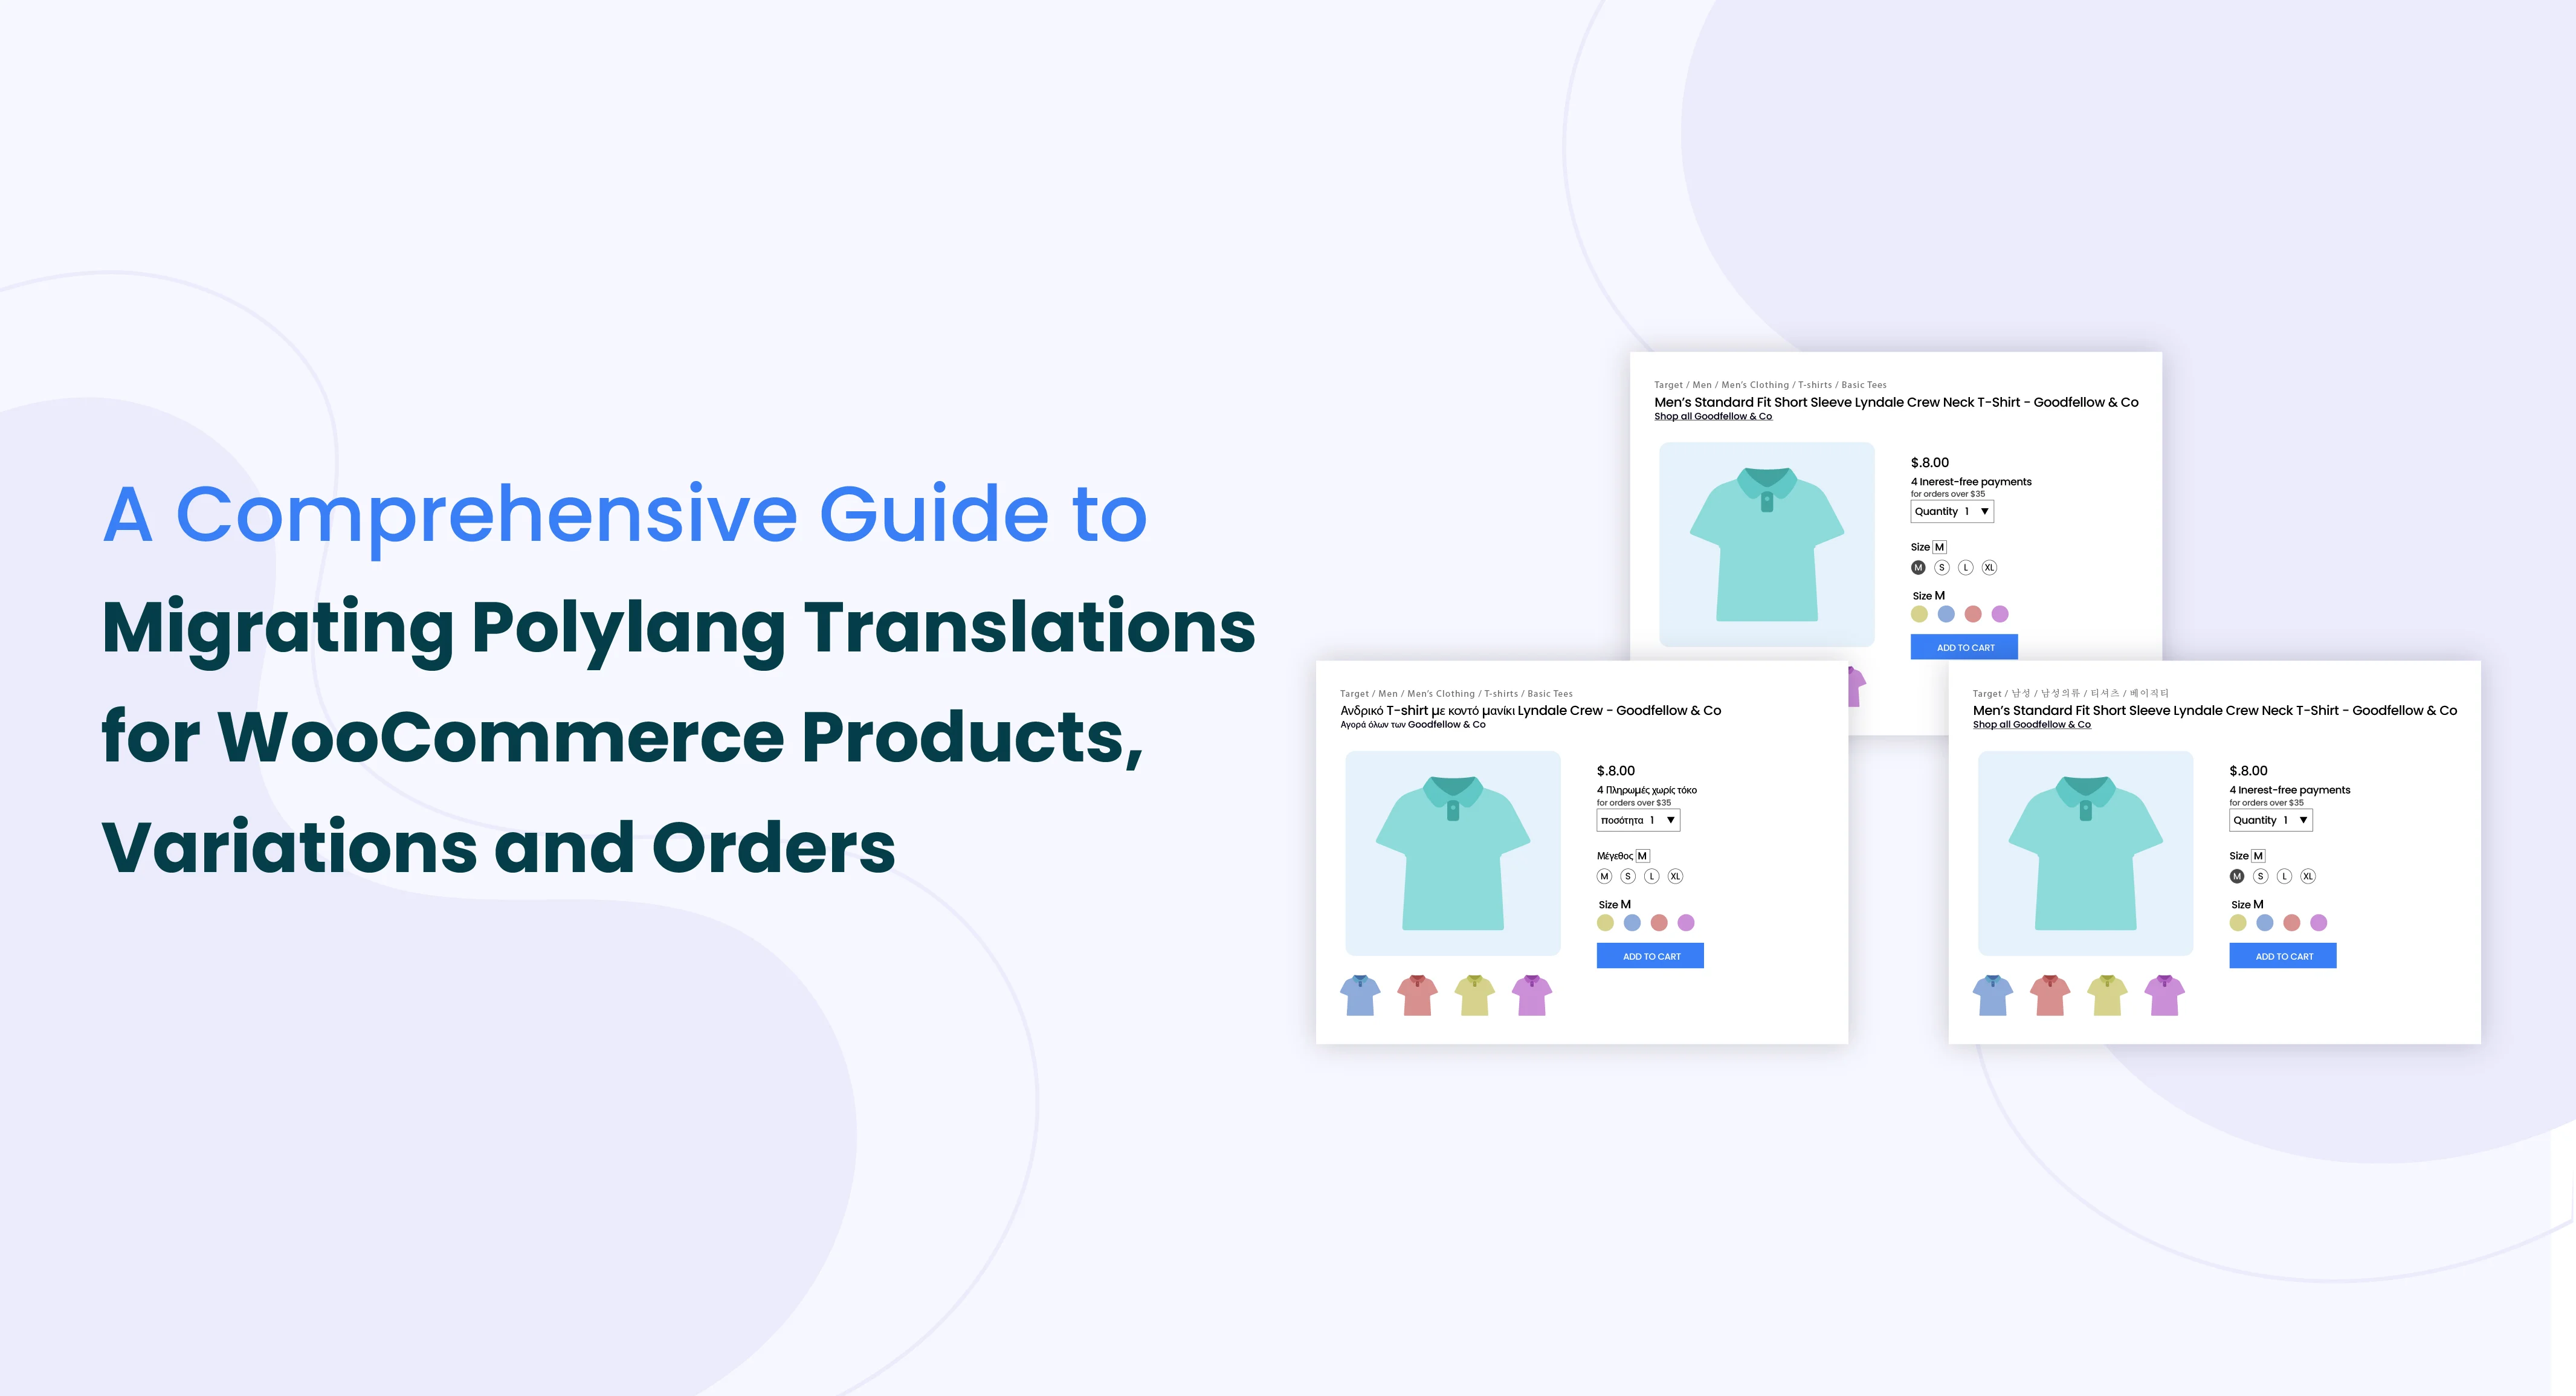 A Comprehensive Guide to Migrating Polylang Translations for WooCommerce Products, Variations and Orders